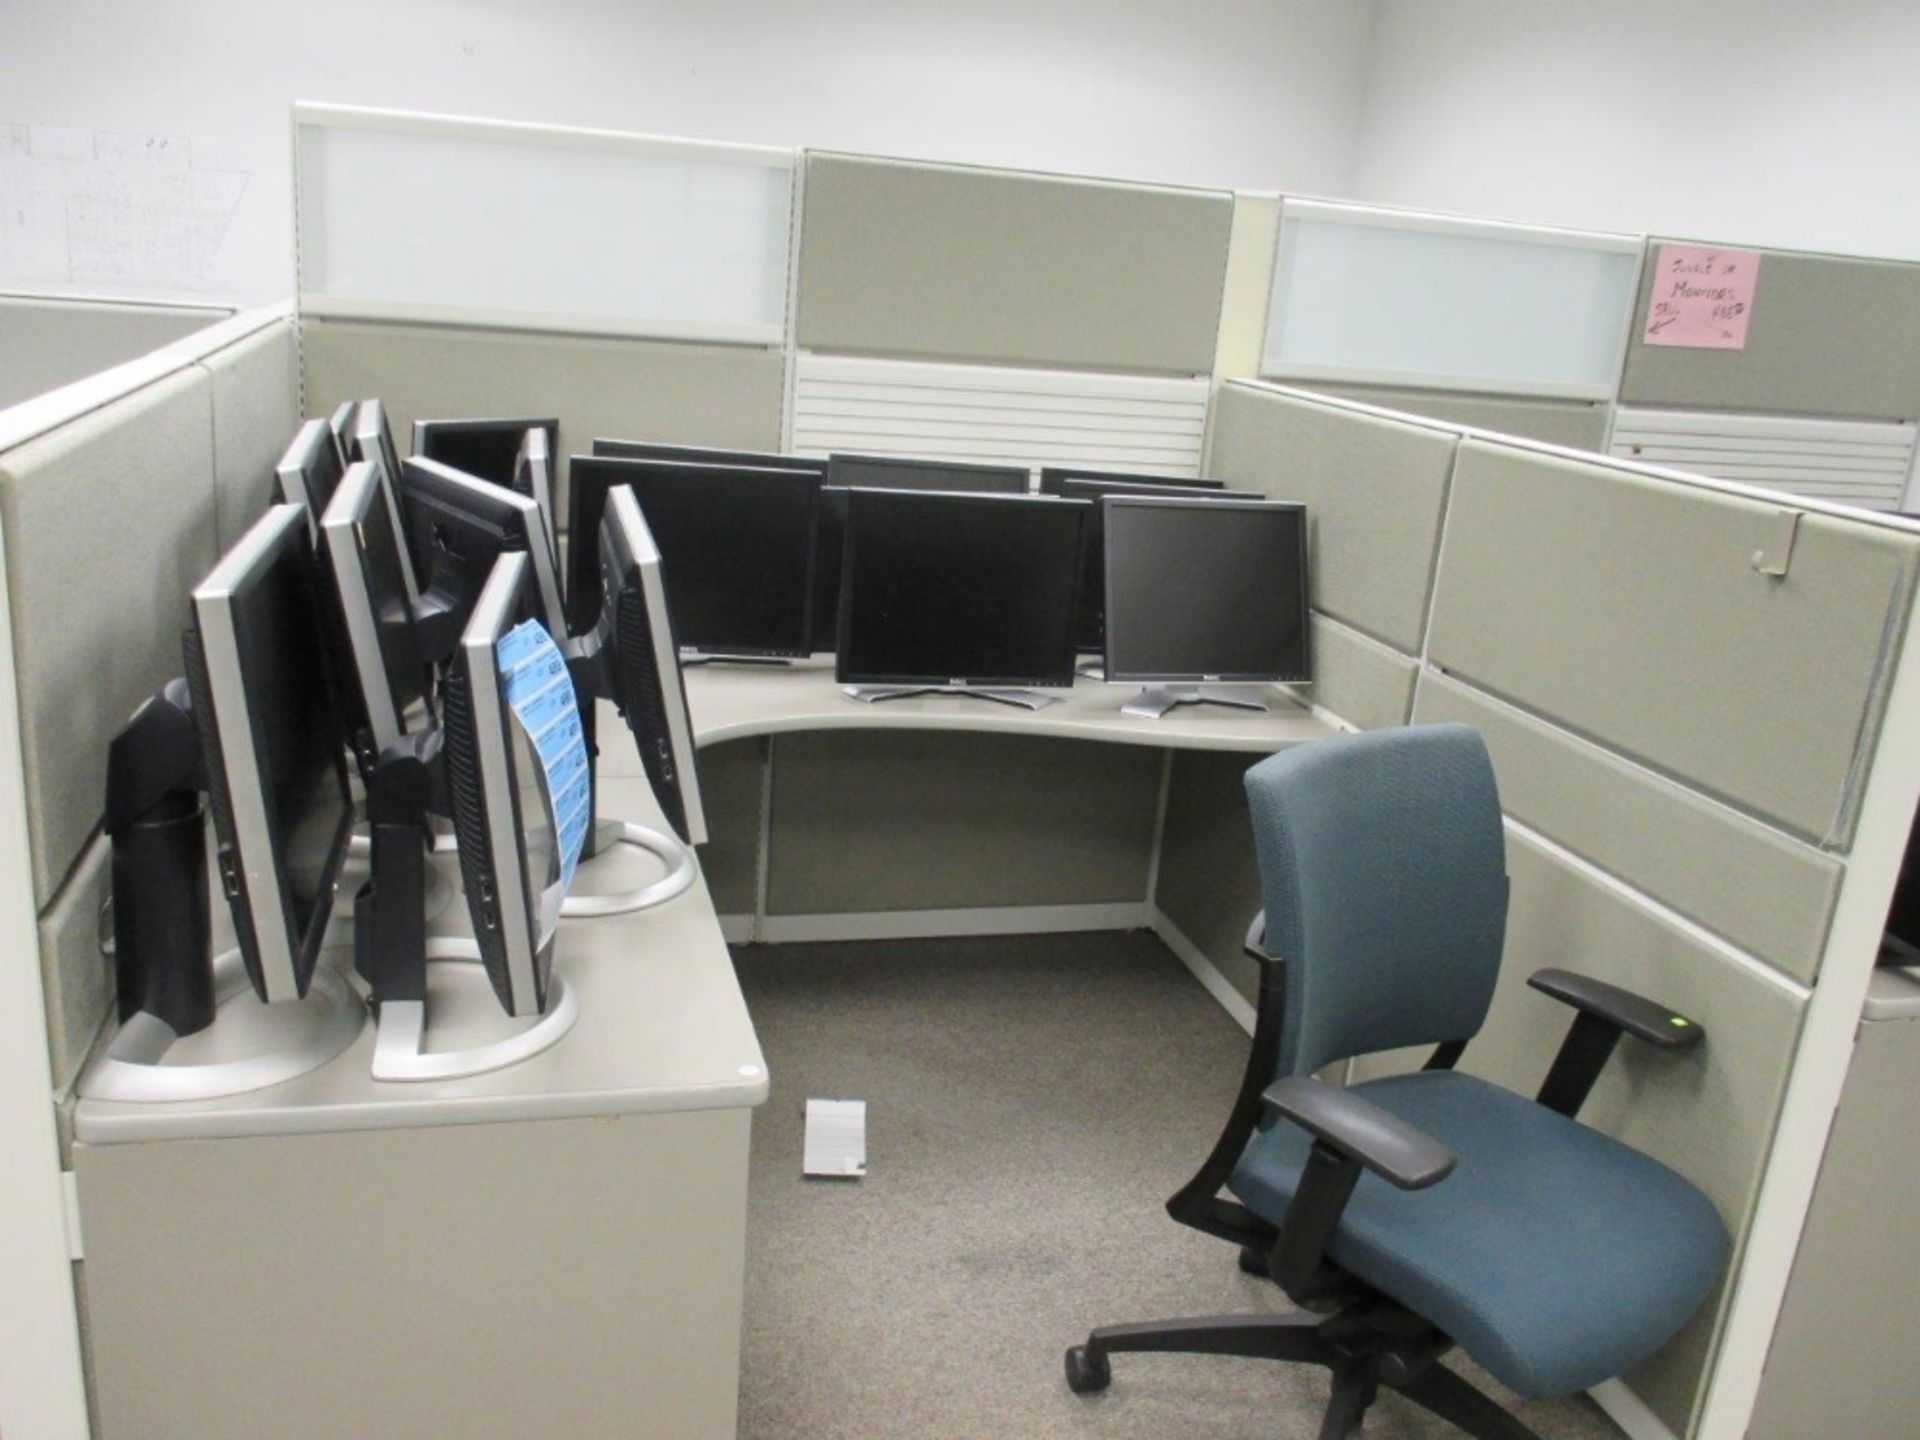 2008 Tecknion 8 Station Work Cubicle System - Image 2 of 6